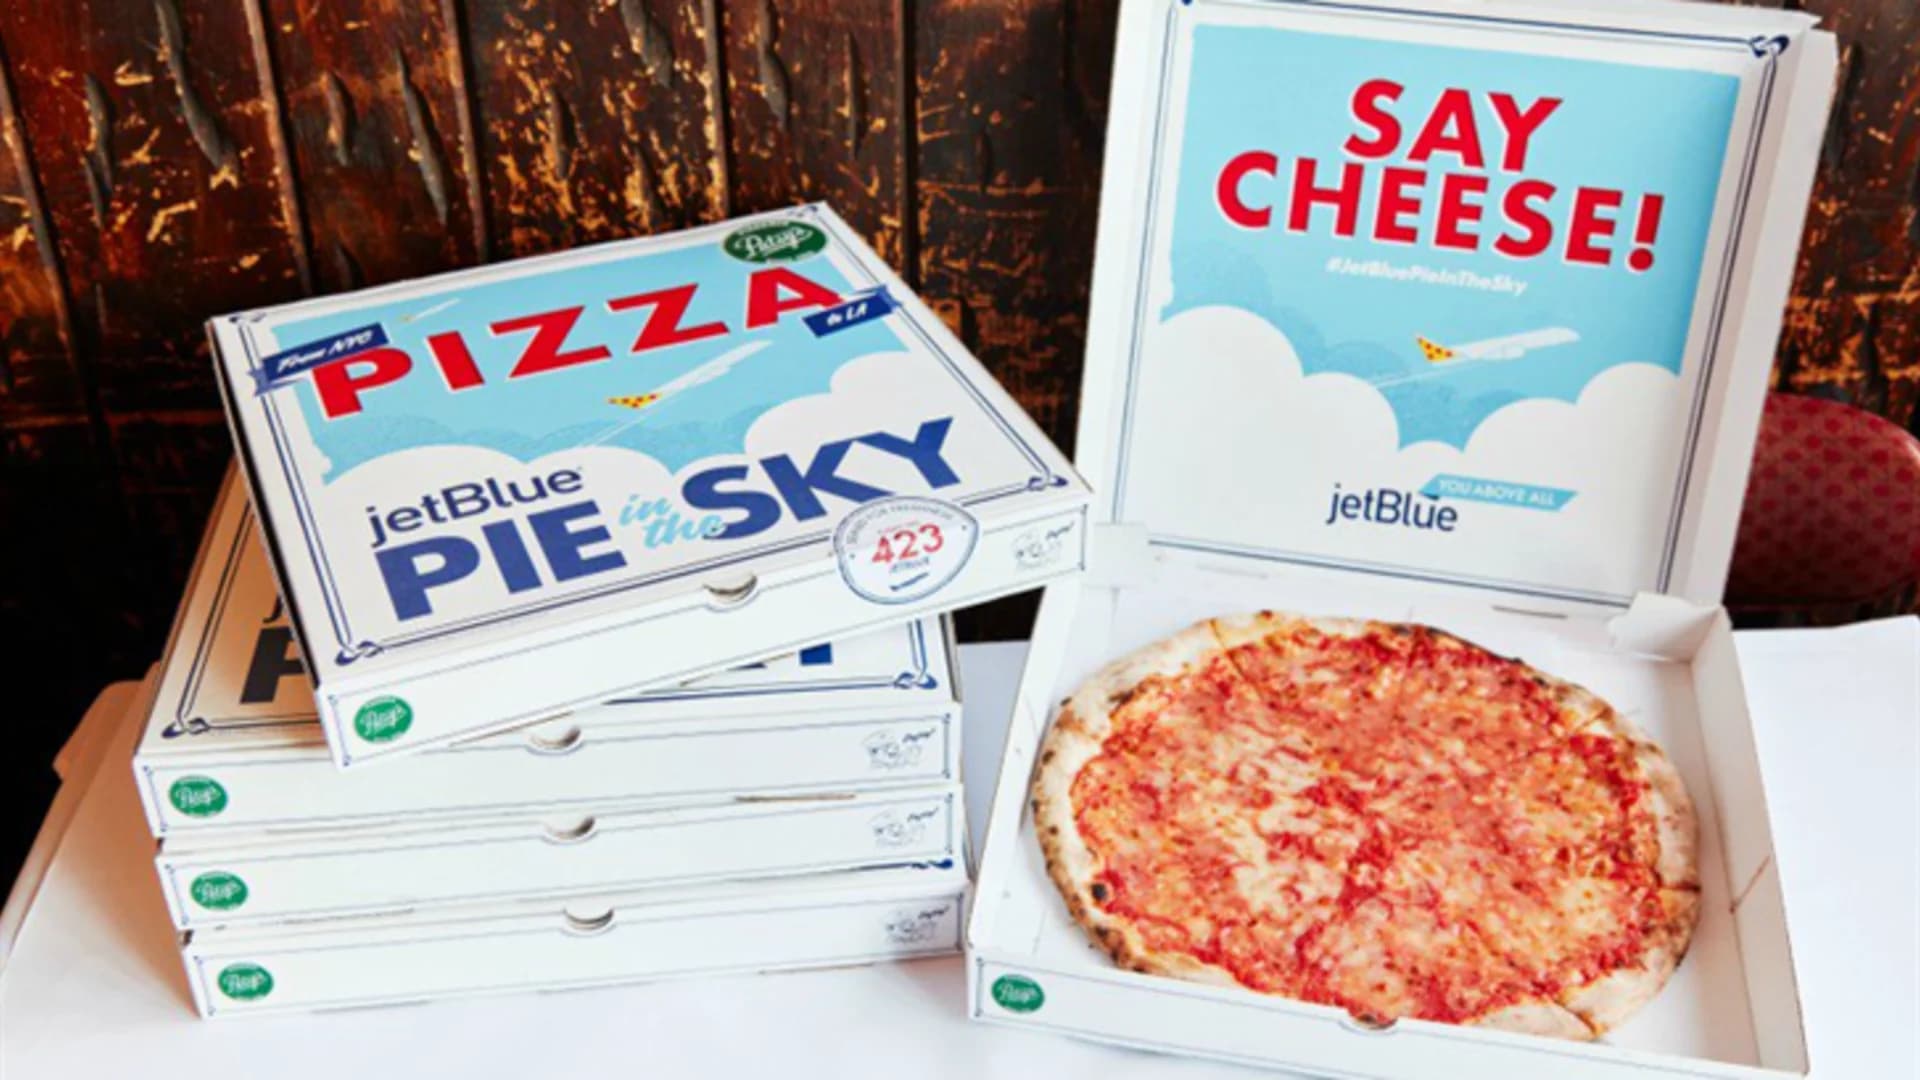 #N12BX: JetBlue delivers New York pizzas to L.A.